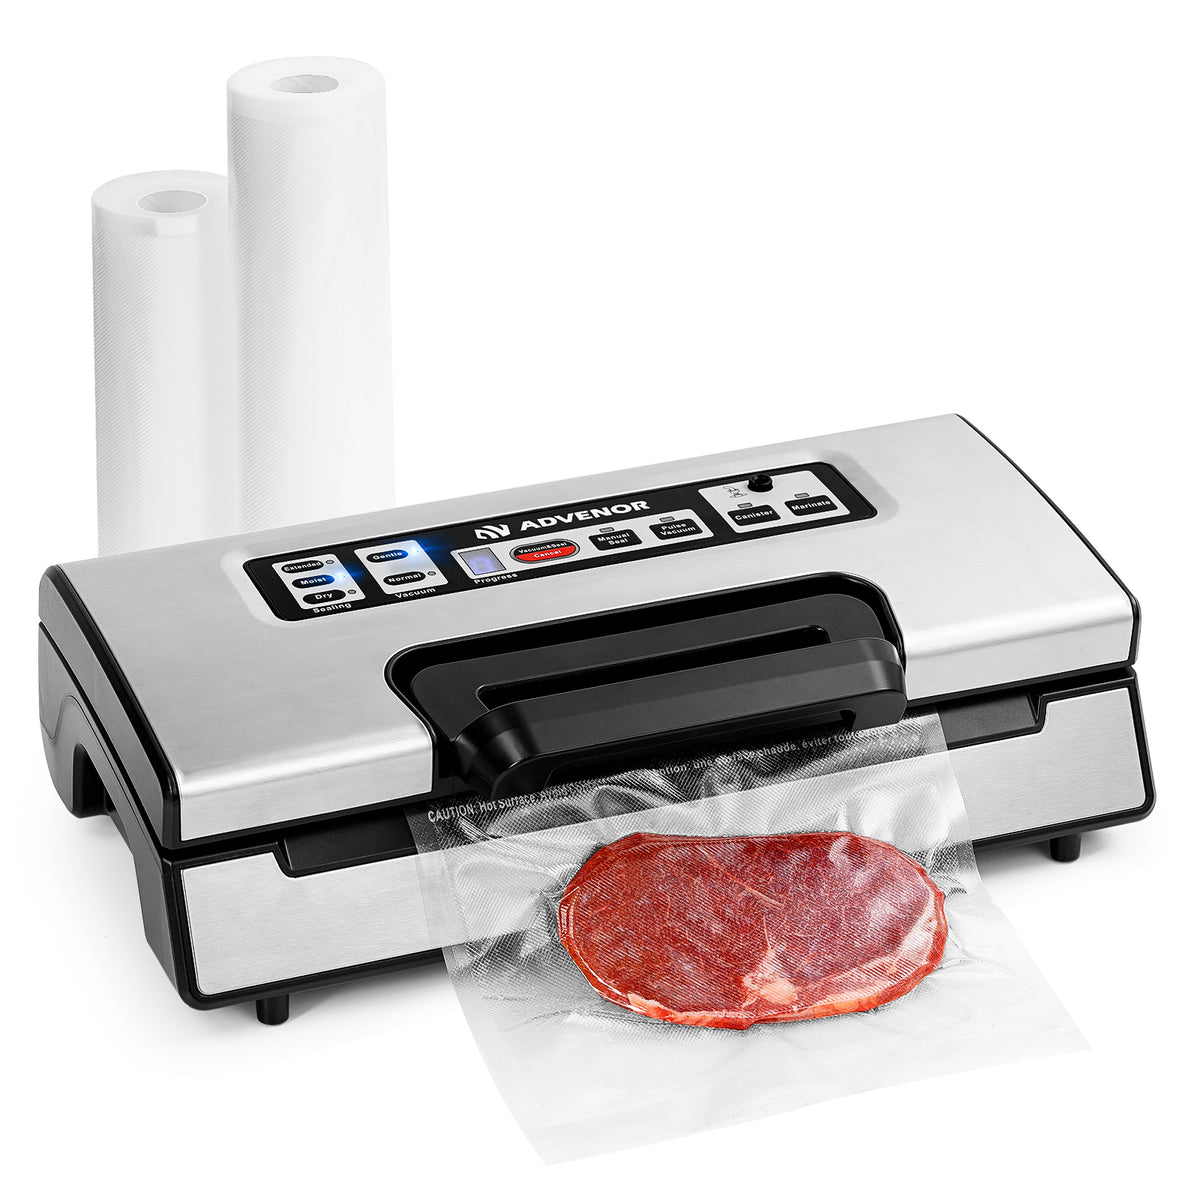 ADVENOR Vacuum Sealer Machine with Cutter Widened Double Sealing Strip